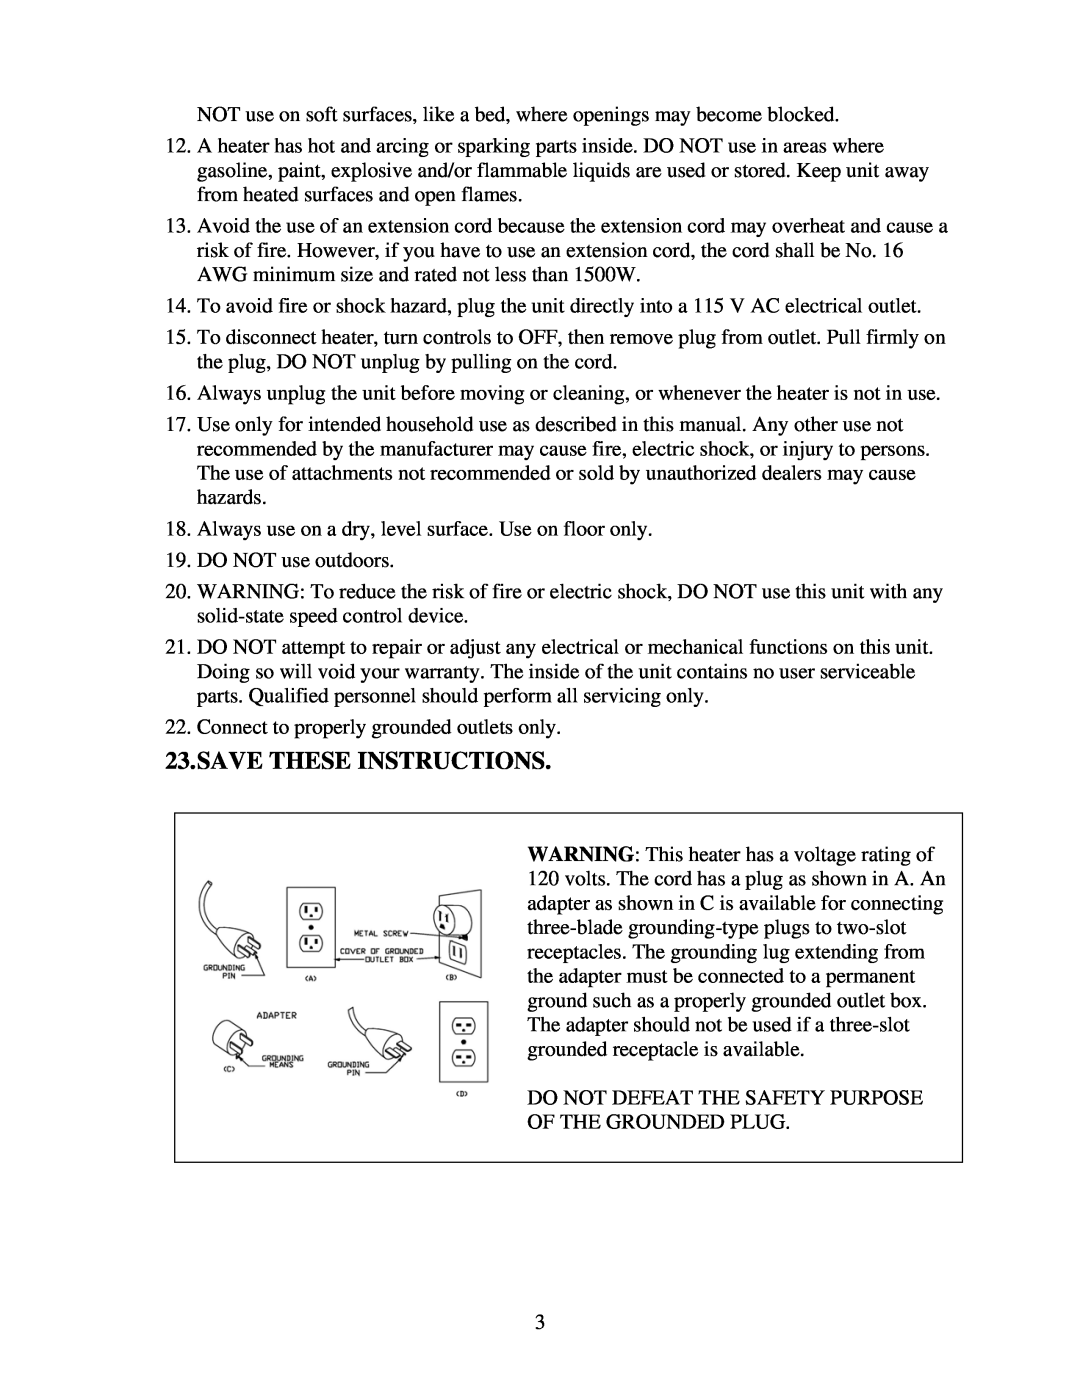 Soleus Air HM2-15R-32 owner manual Save These Instructions 